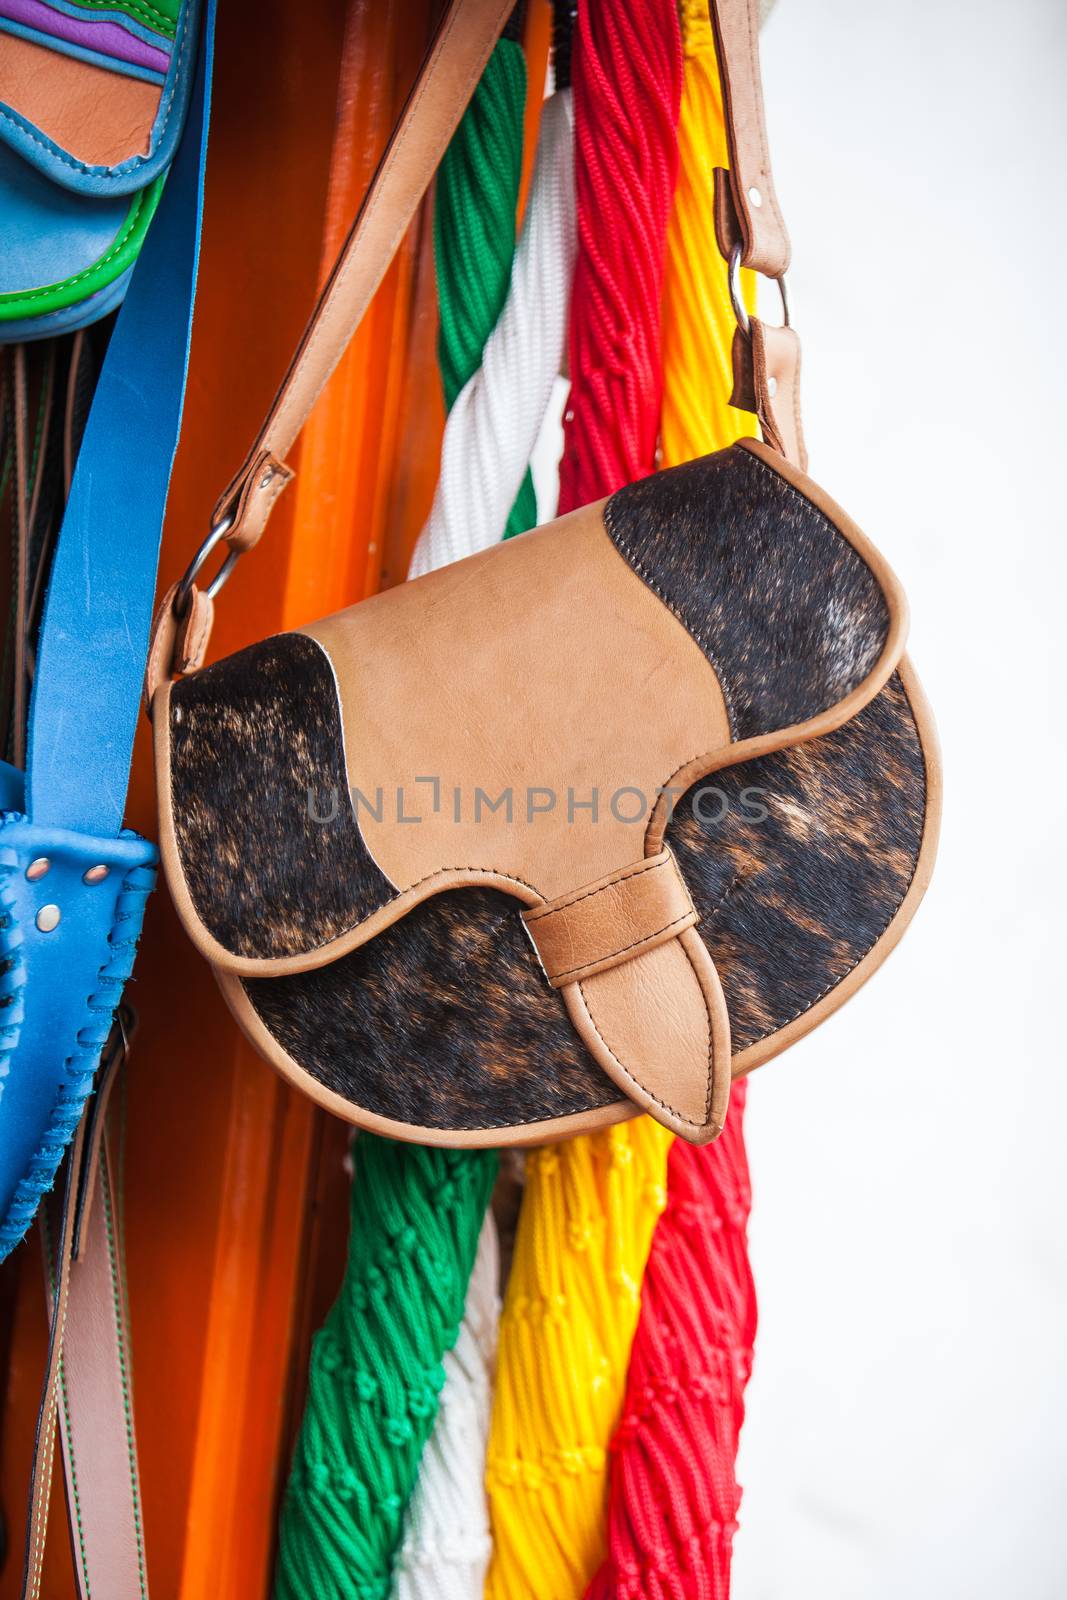 Colombian traditional leather satchel from the Antioquia Region  by anamejia18